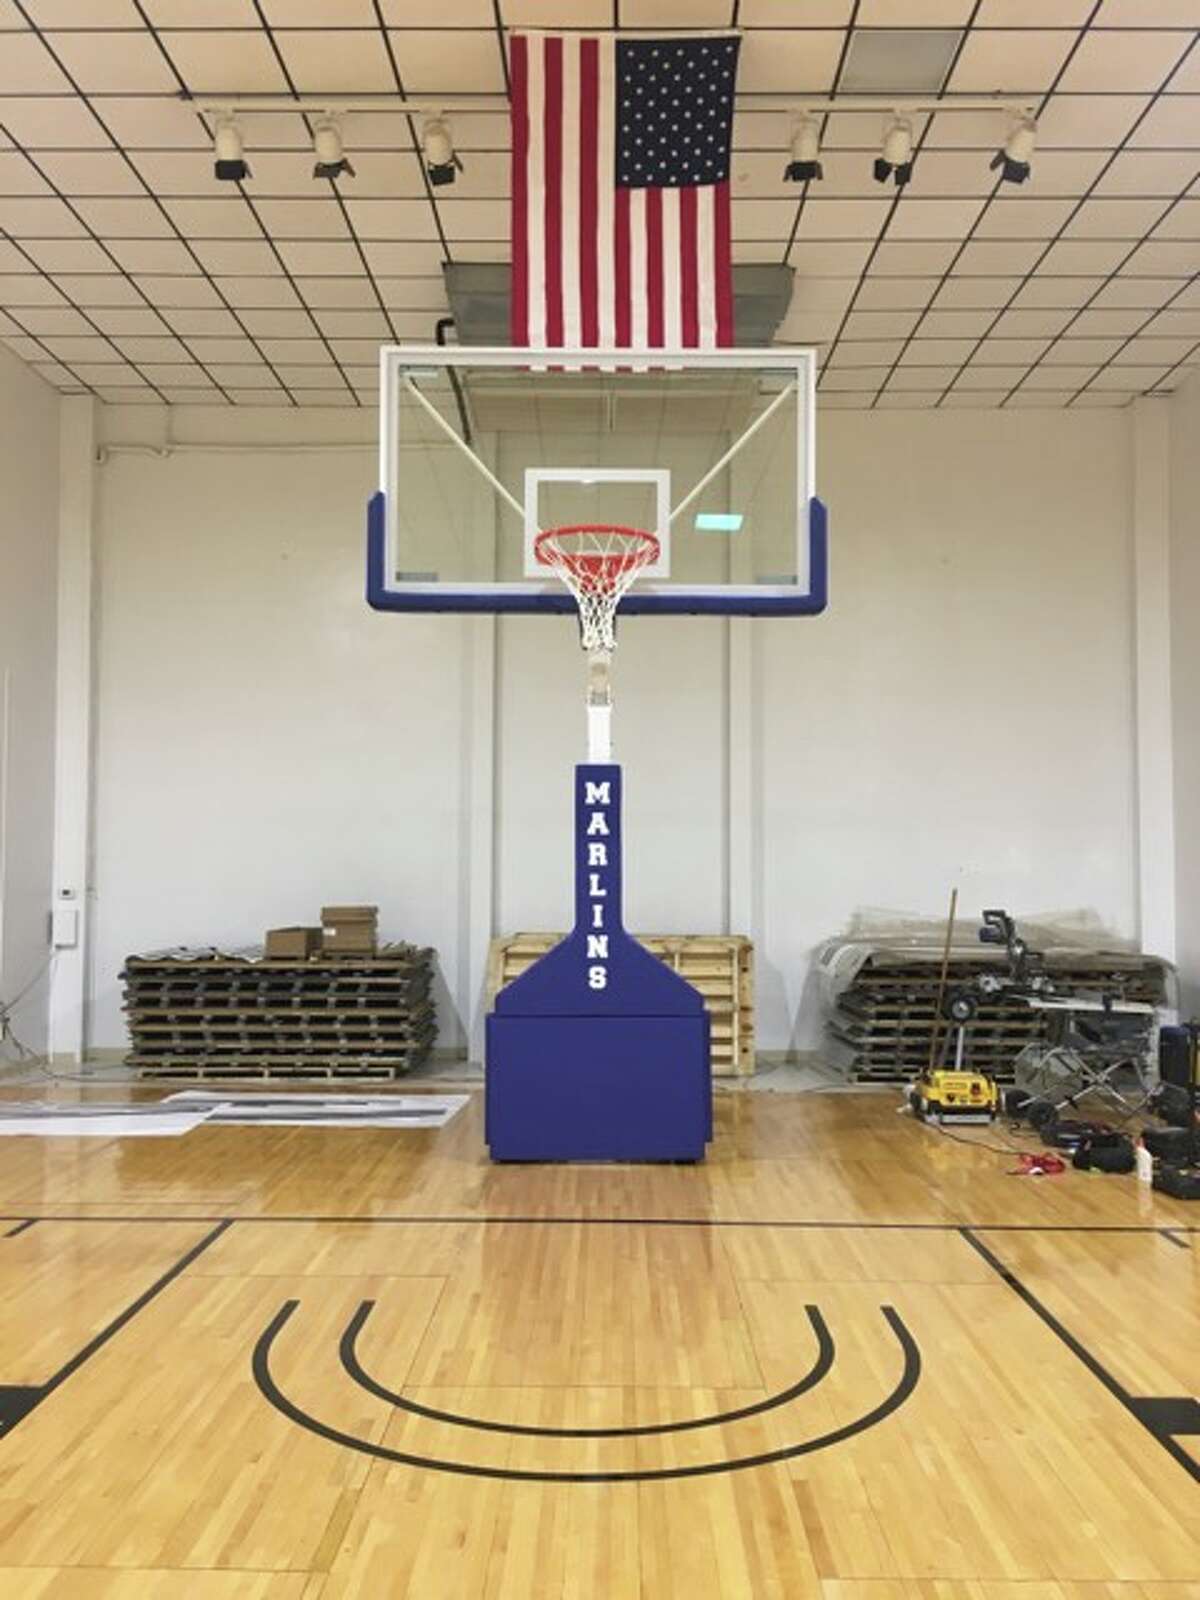 Pictured here is the temporary gym set up for students of Port Aransas Independent School District, ready for practice at the city's civic center by Oct. 20, 2017.